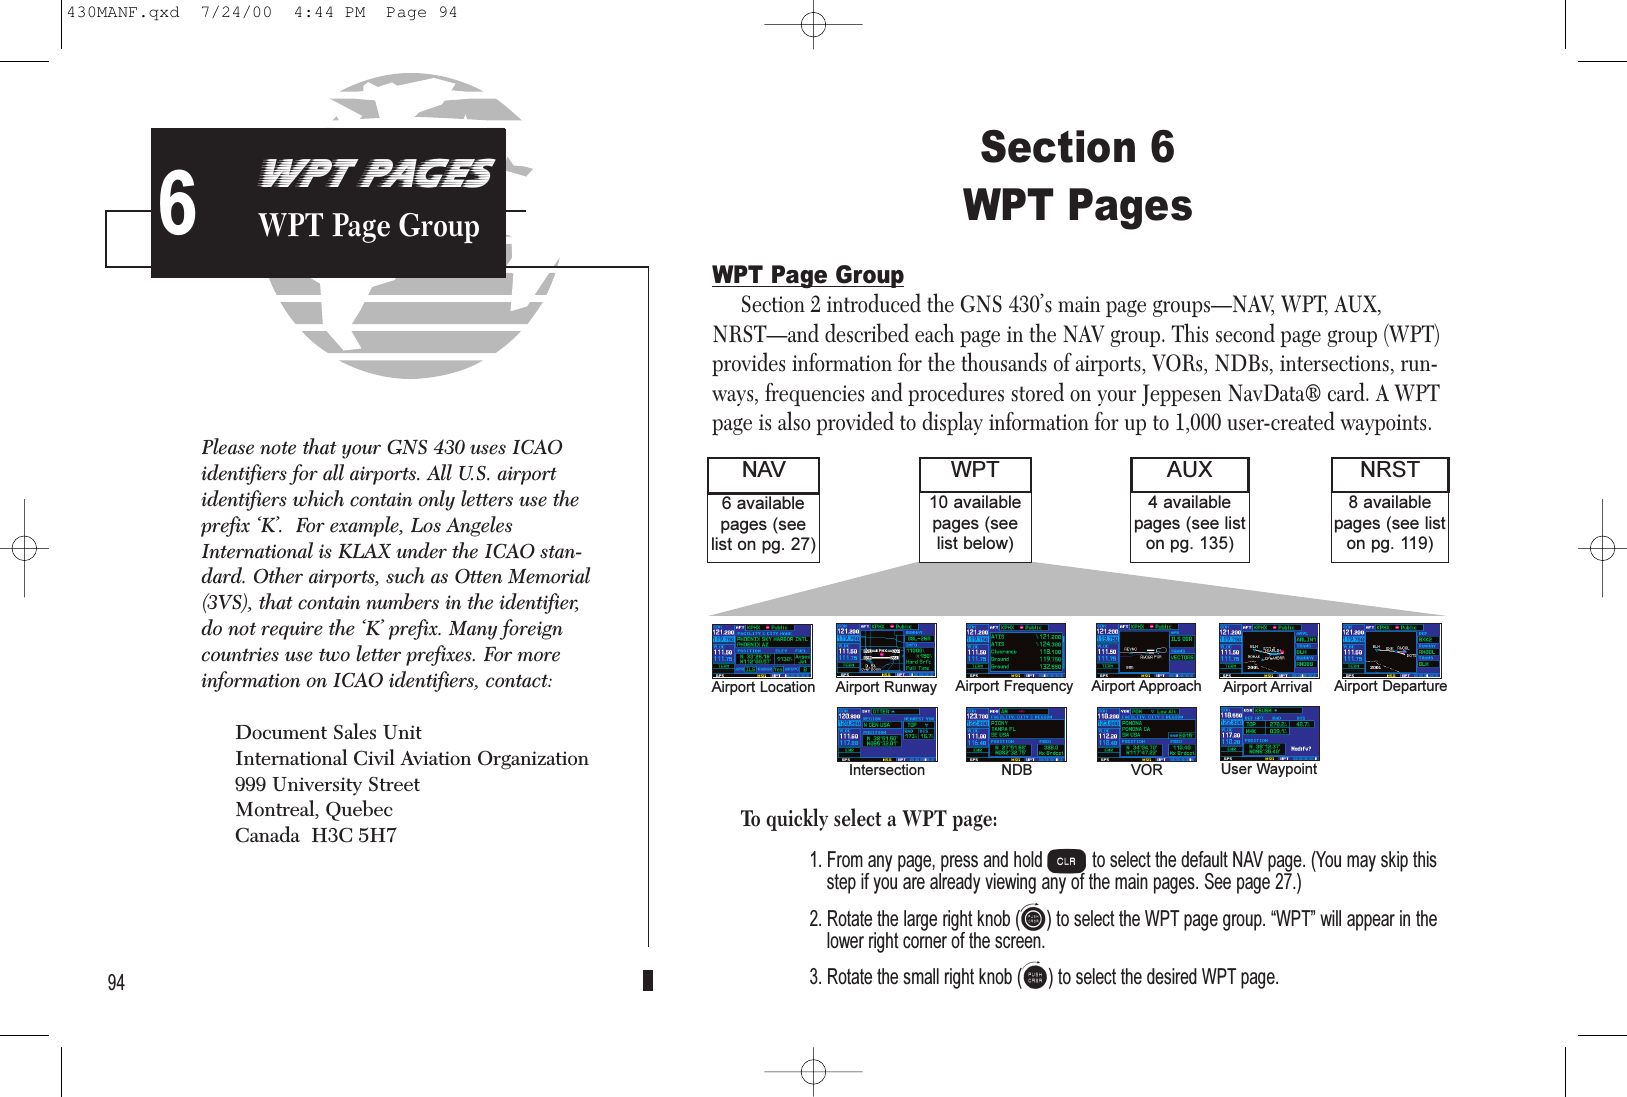 PROCEDURESApproach Examples5Section 6WPT PagesWPT Page GroupSection 2 introduced the GNS 430’s main page groups—NAV, WPT, AUX,NRST—and described each page in the NAV group. This second page group (WPT)provides information for the thousands of airports, VORs, NDBs, intersections, run-ways, frequencies and procedures stored on your Jeppesen NavData® card. A WPTpage is also provided to display information for up to 1,000 user-created waypoints.To quickly select a WPT page:1. From any page, press and hold cto select the default NAV page. (You may skip thisstep if you are already viewing any of the main pages. See page 27.)2. Rotate the large right knob (d) to select the WPT page group. WPT will appear in thelower right corner of the screen.3. Rotate the small right knob (a) to select the desired WPT page.94WPT PAGESWPT Page Group68 availablepages (see liston pg. 119)6 availablepages (seelist on pg. 27)NAV NRST4 availablepages (see liston pg. 135)AUX10 availablepages (seelist below)WPTAirport Location Airport Runway Airport Frequency Airport Approach Airport Arrival Airport DepartureIntersection NDB VOR User WaypointPlease note that your GNS 430 uses ICAOidentifiers for all airports. All U.S. airportidentifiers which contain only letters use theprefix ‘K’.  For example, Los AngelesInternational is KLAX under the ICAO stan-dard. Other airports, such as Otten Memorial(3VS), that contain numbers in the identifier,do not require the ‘K’ prefix. Many foreigncountries use two letter prefixes. For moreinformation on ICAO identifiers, contact:Document Sales UnitInternational Civil Aviation Organization999 University StreetMontreal, QuebecCanada  H3C 5H7430MANF.qxd  7/24/00  4:44 PM  Page 94